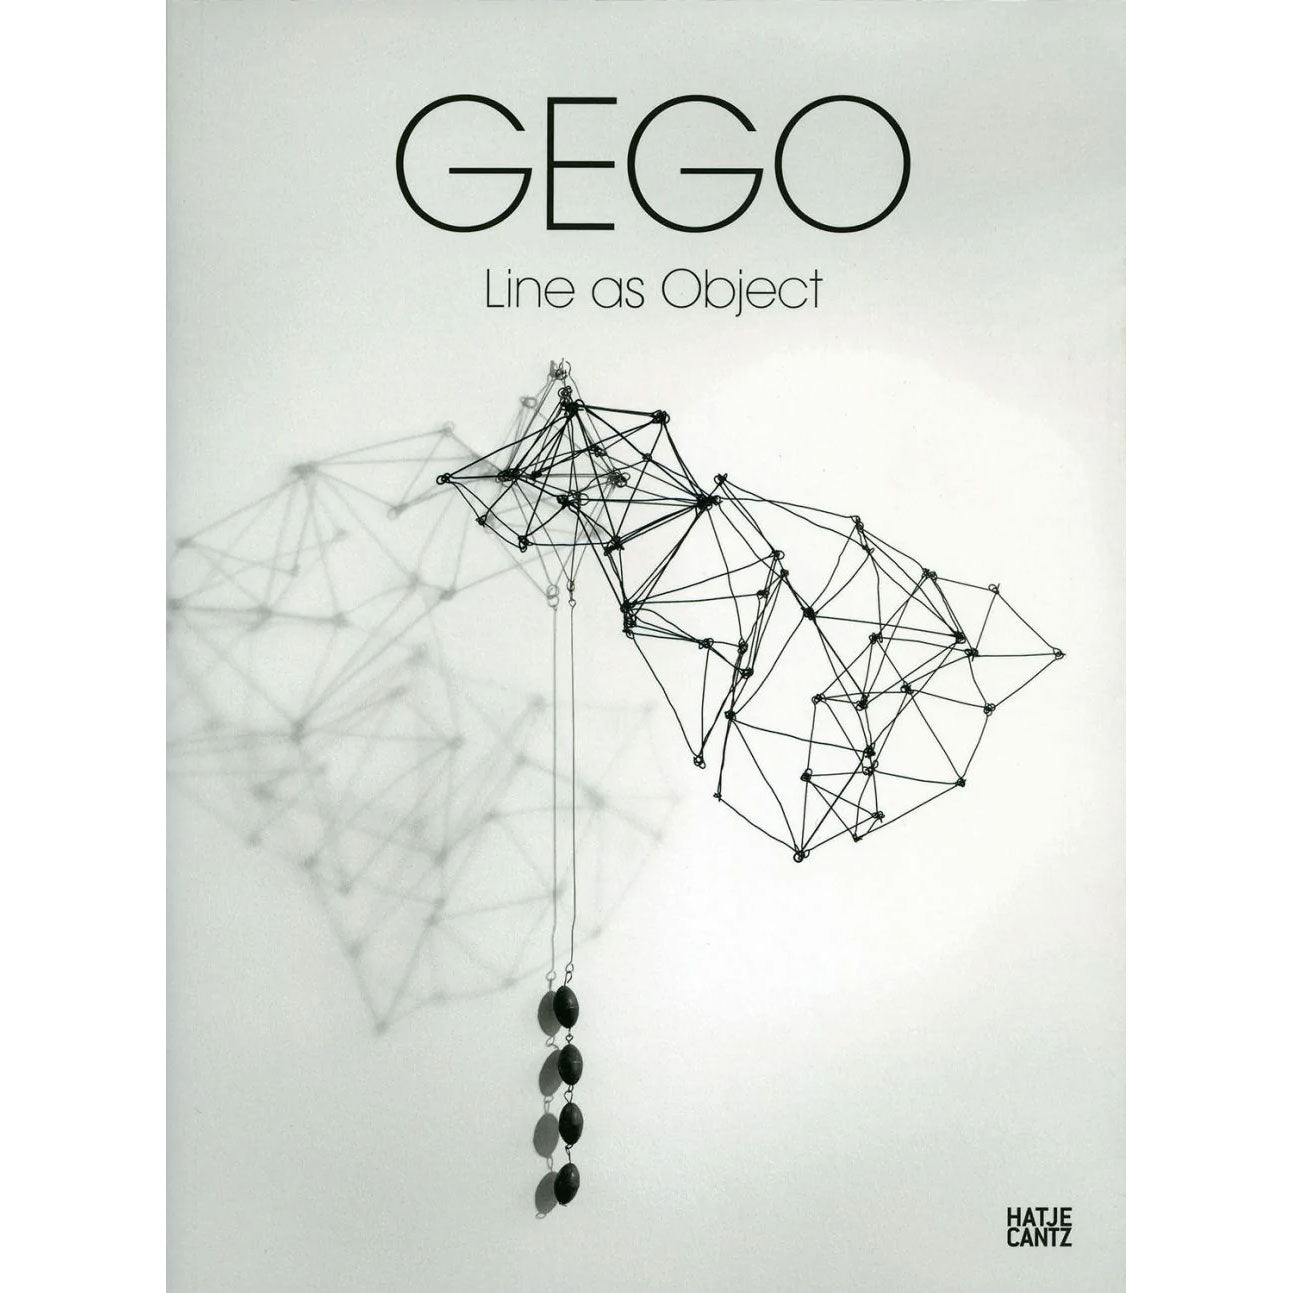 Gego: Line as Object